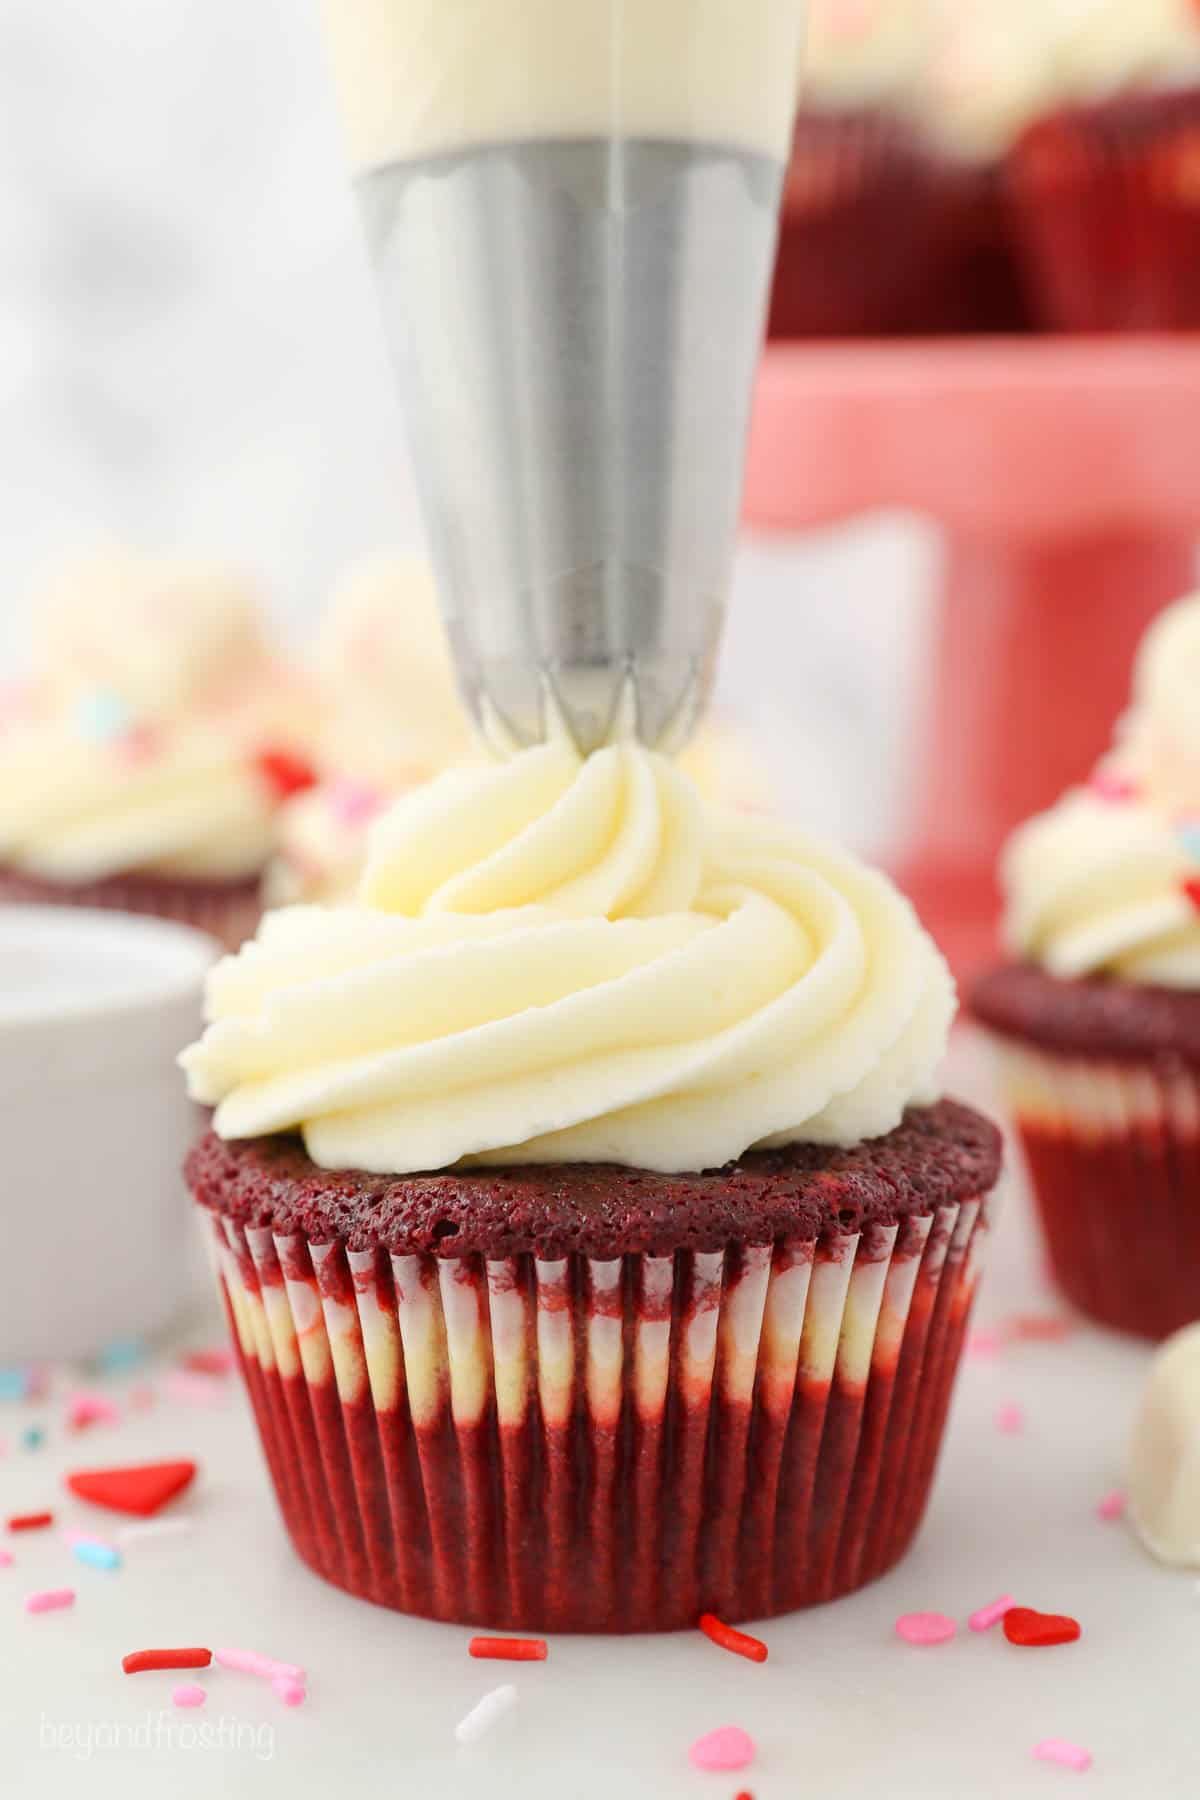 A piping bag adding cream cheese frosting on top of a red velvet cupcake